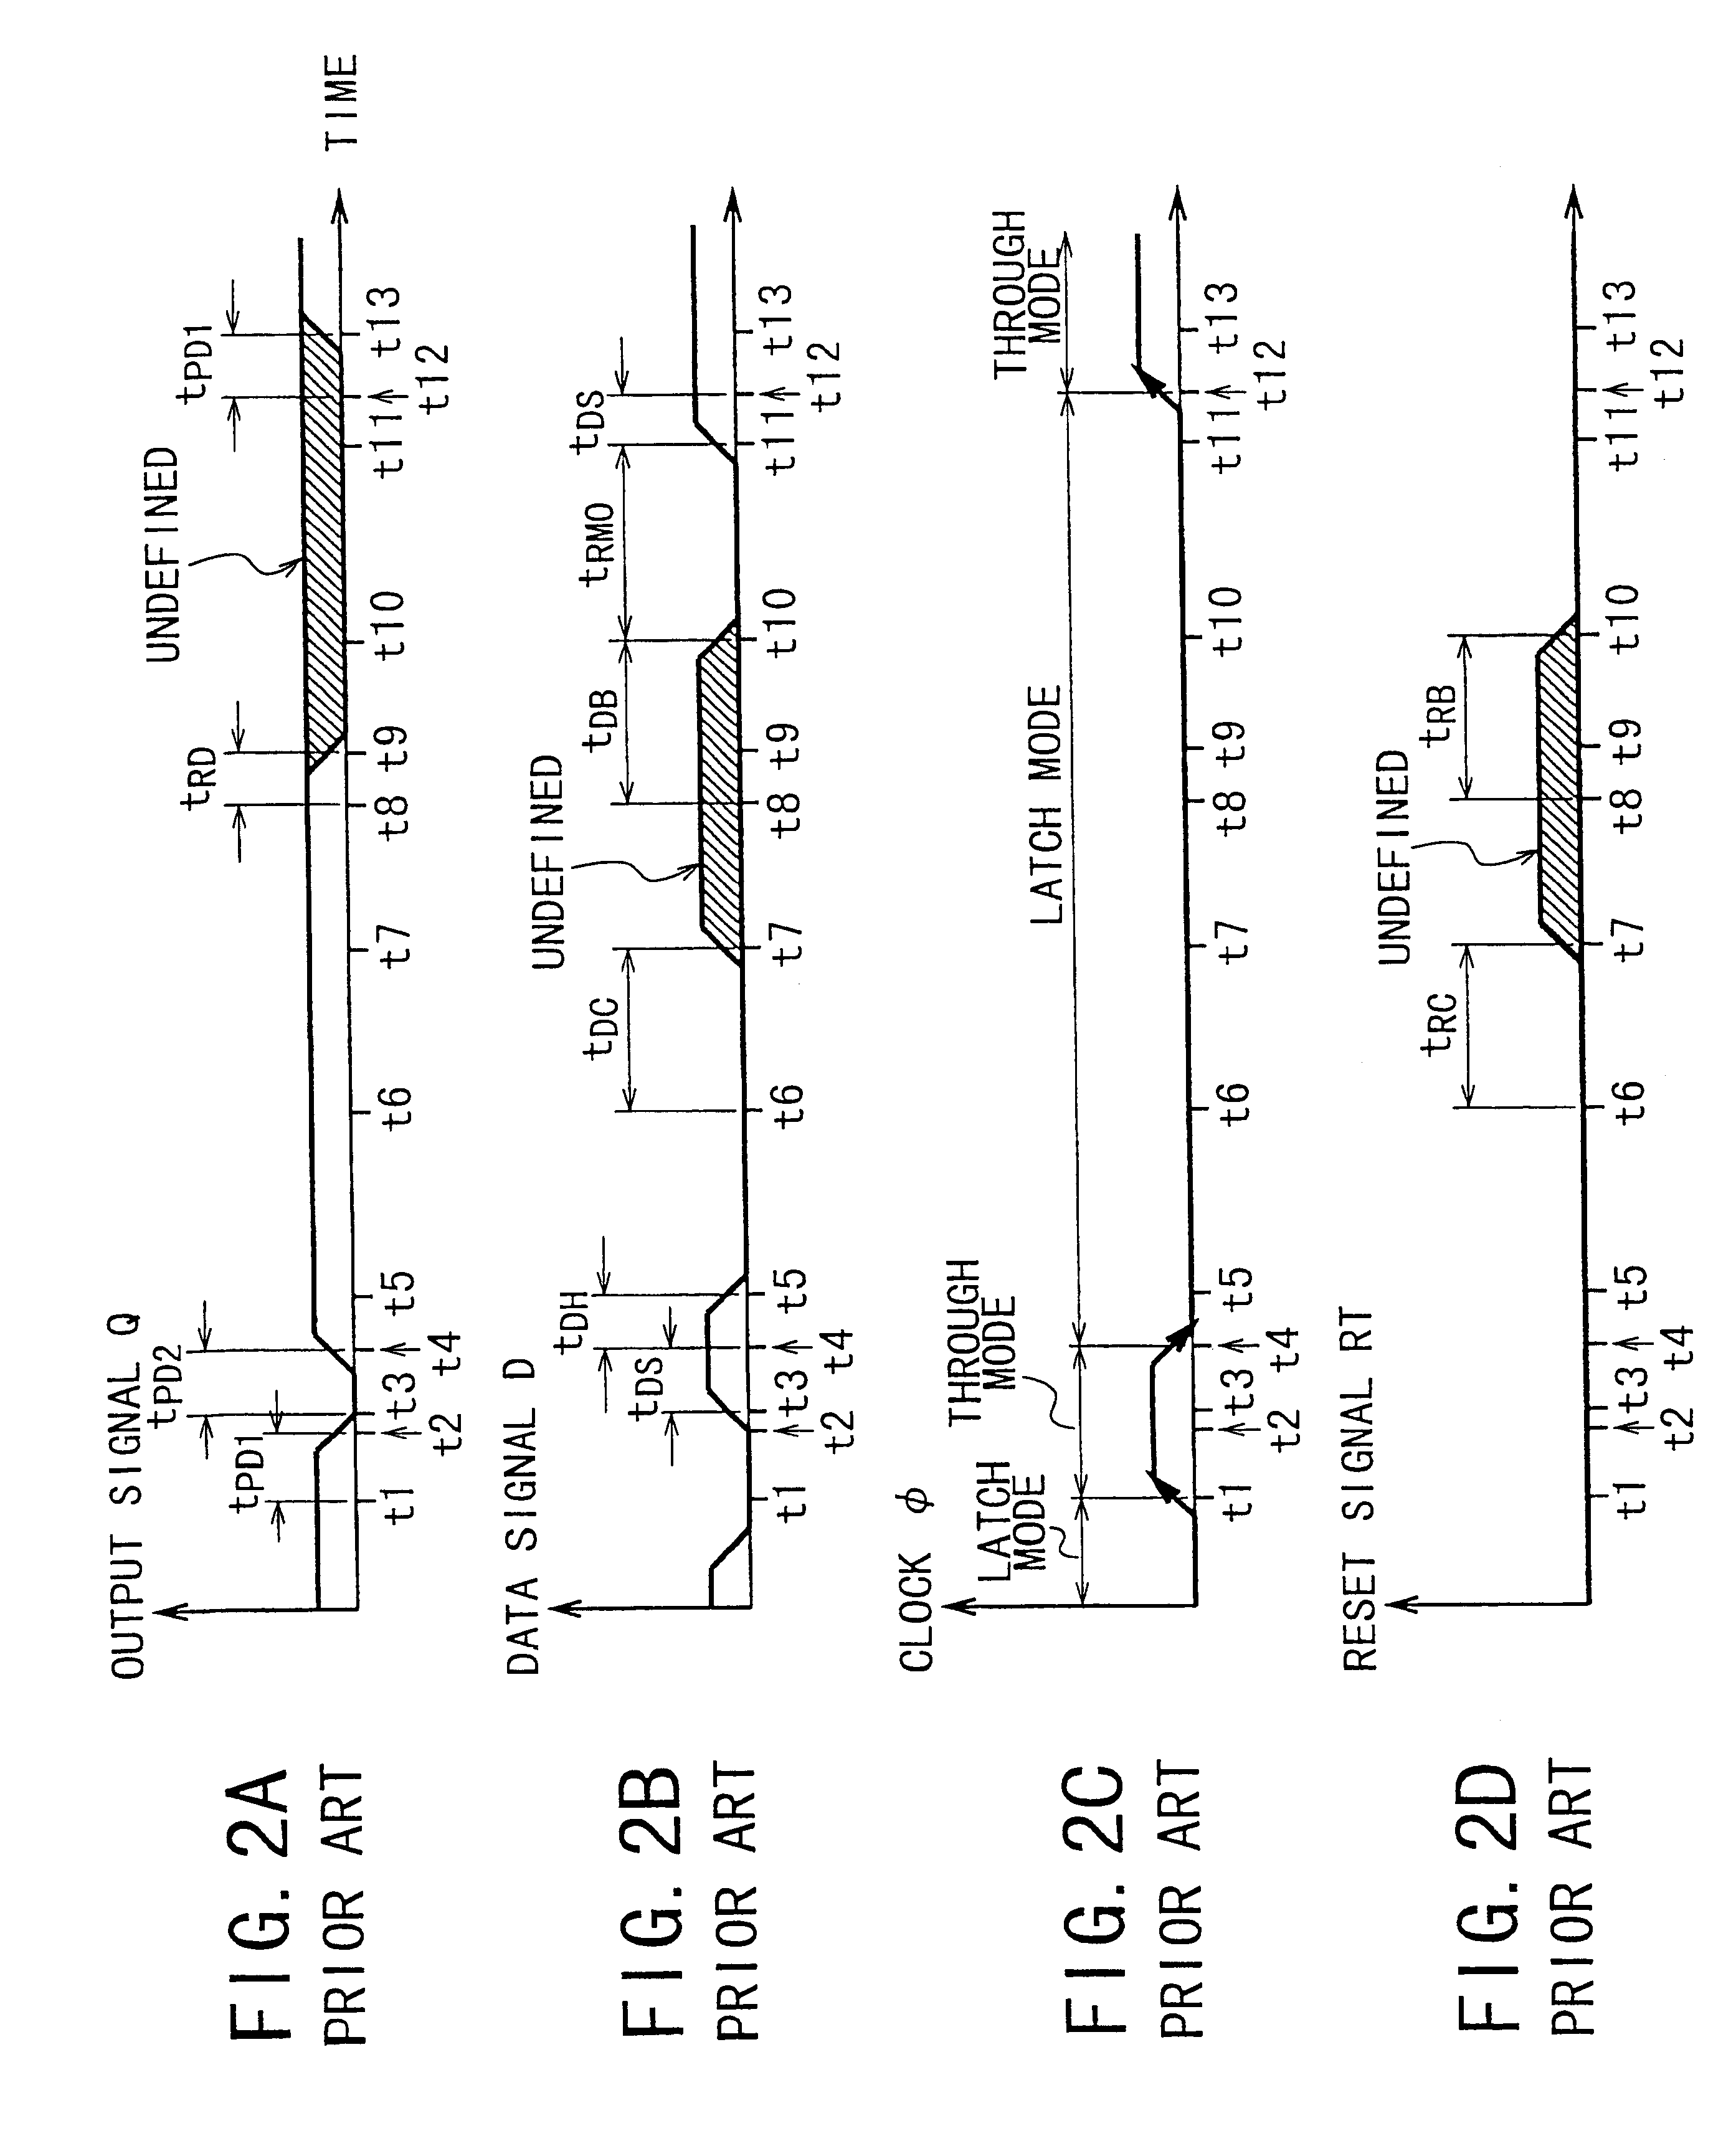 Sequential logic circuit with active and sleep modes